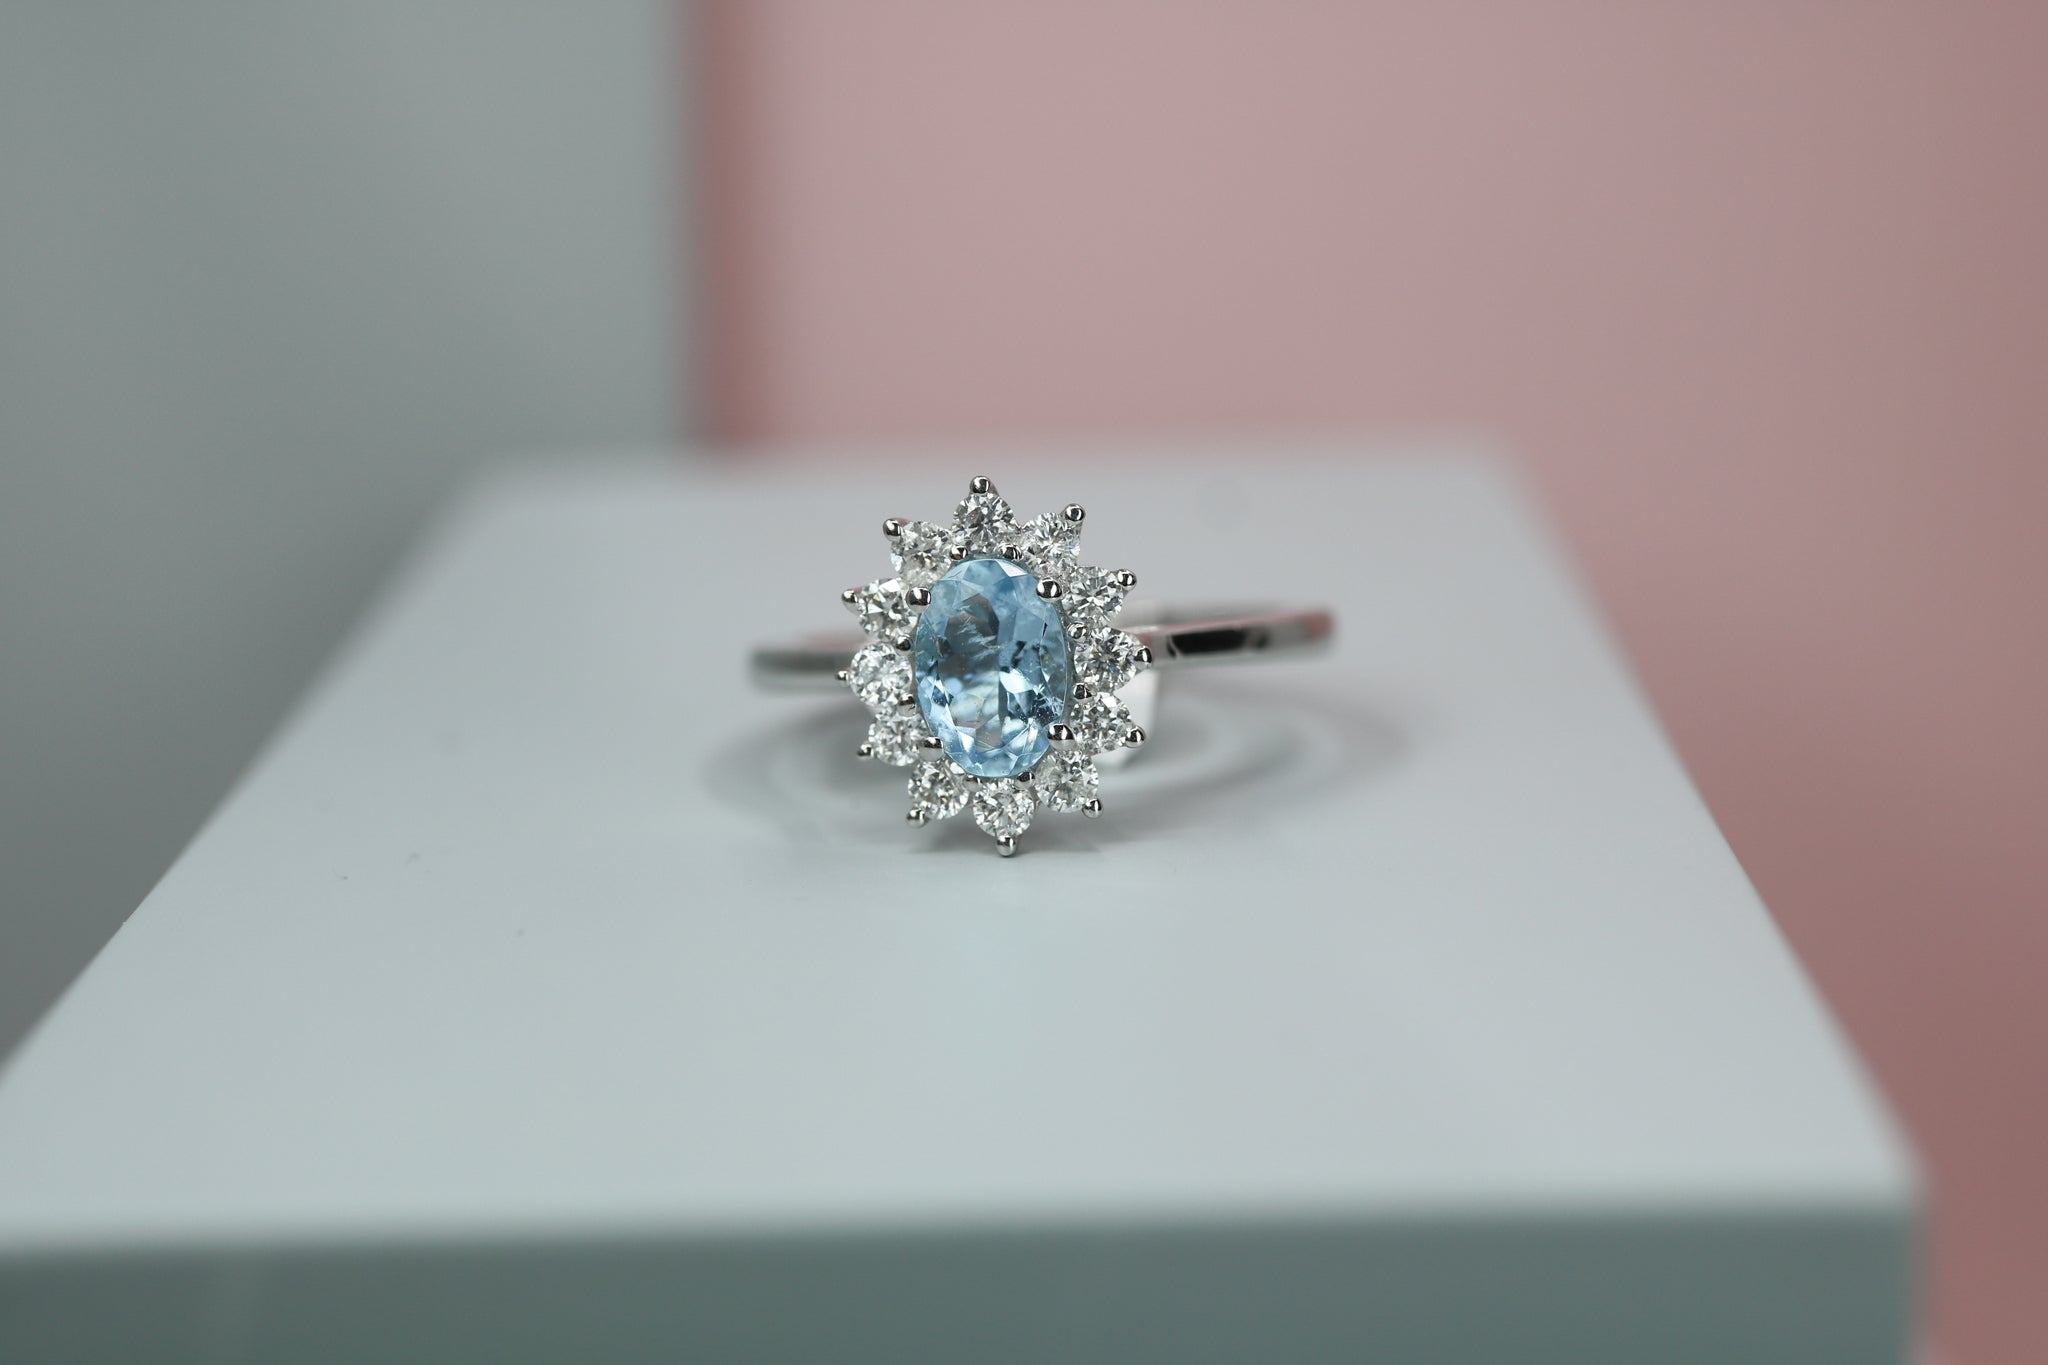 18ct White Gold Diamond & Aquamarine Cluster Ring - HJ2075 - Hallmark Jewellers Formby & The Jewellers Bench Widnes